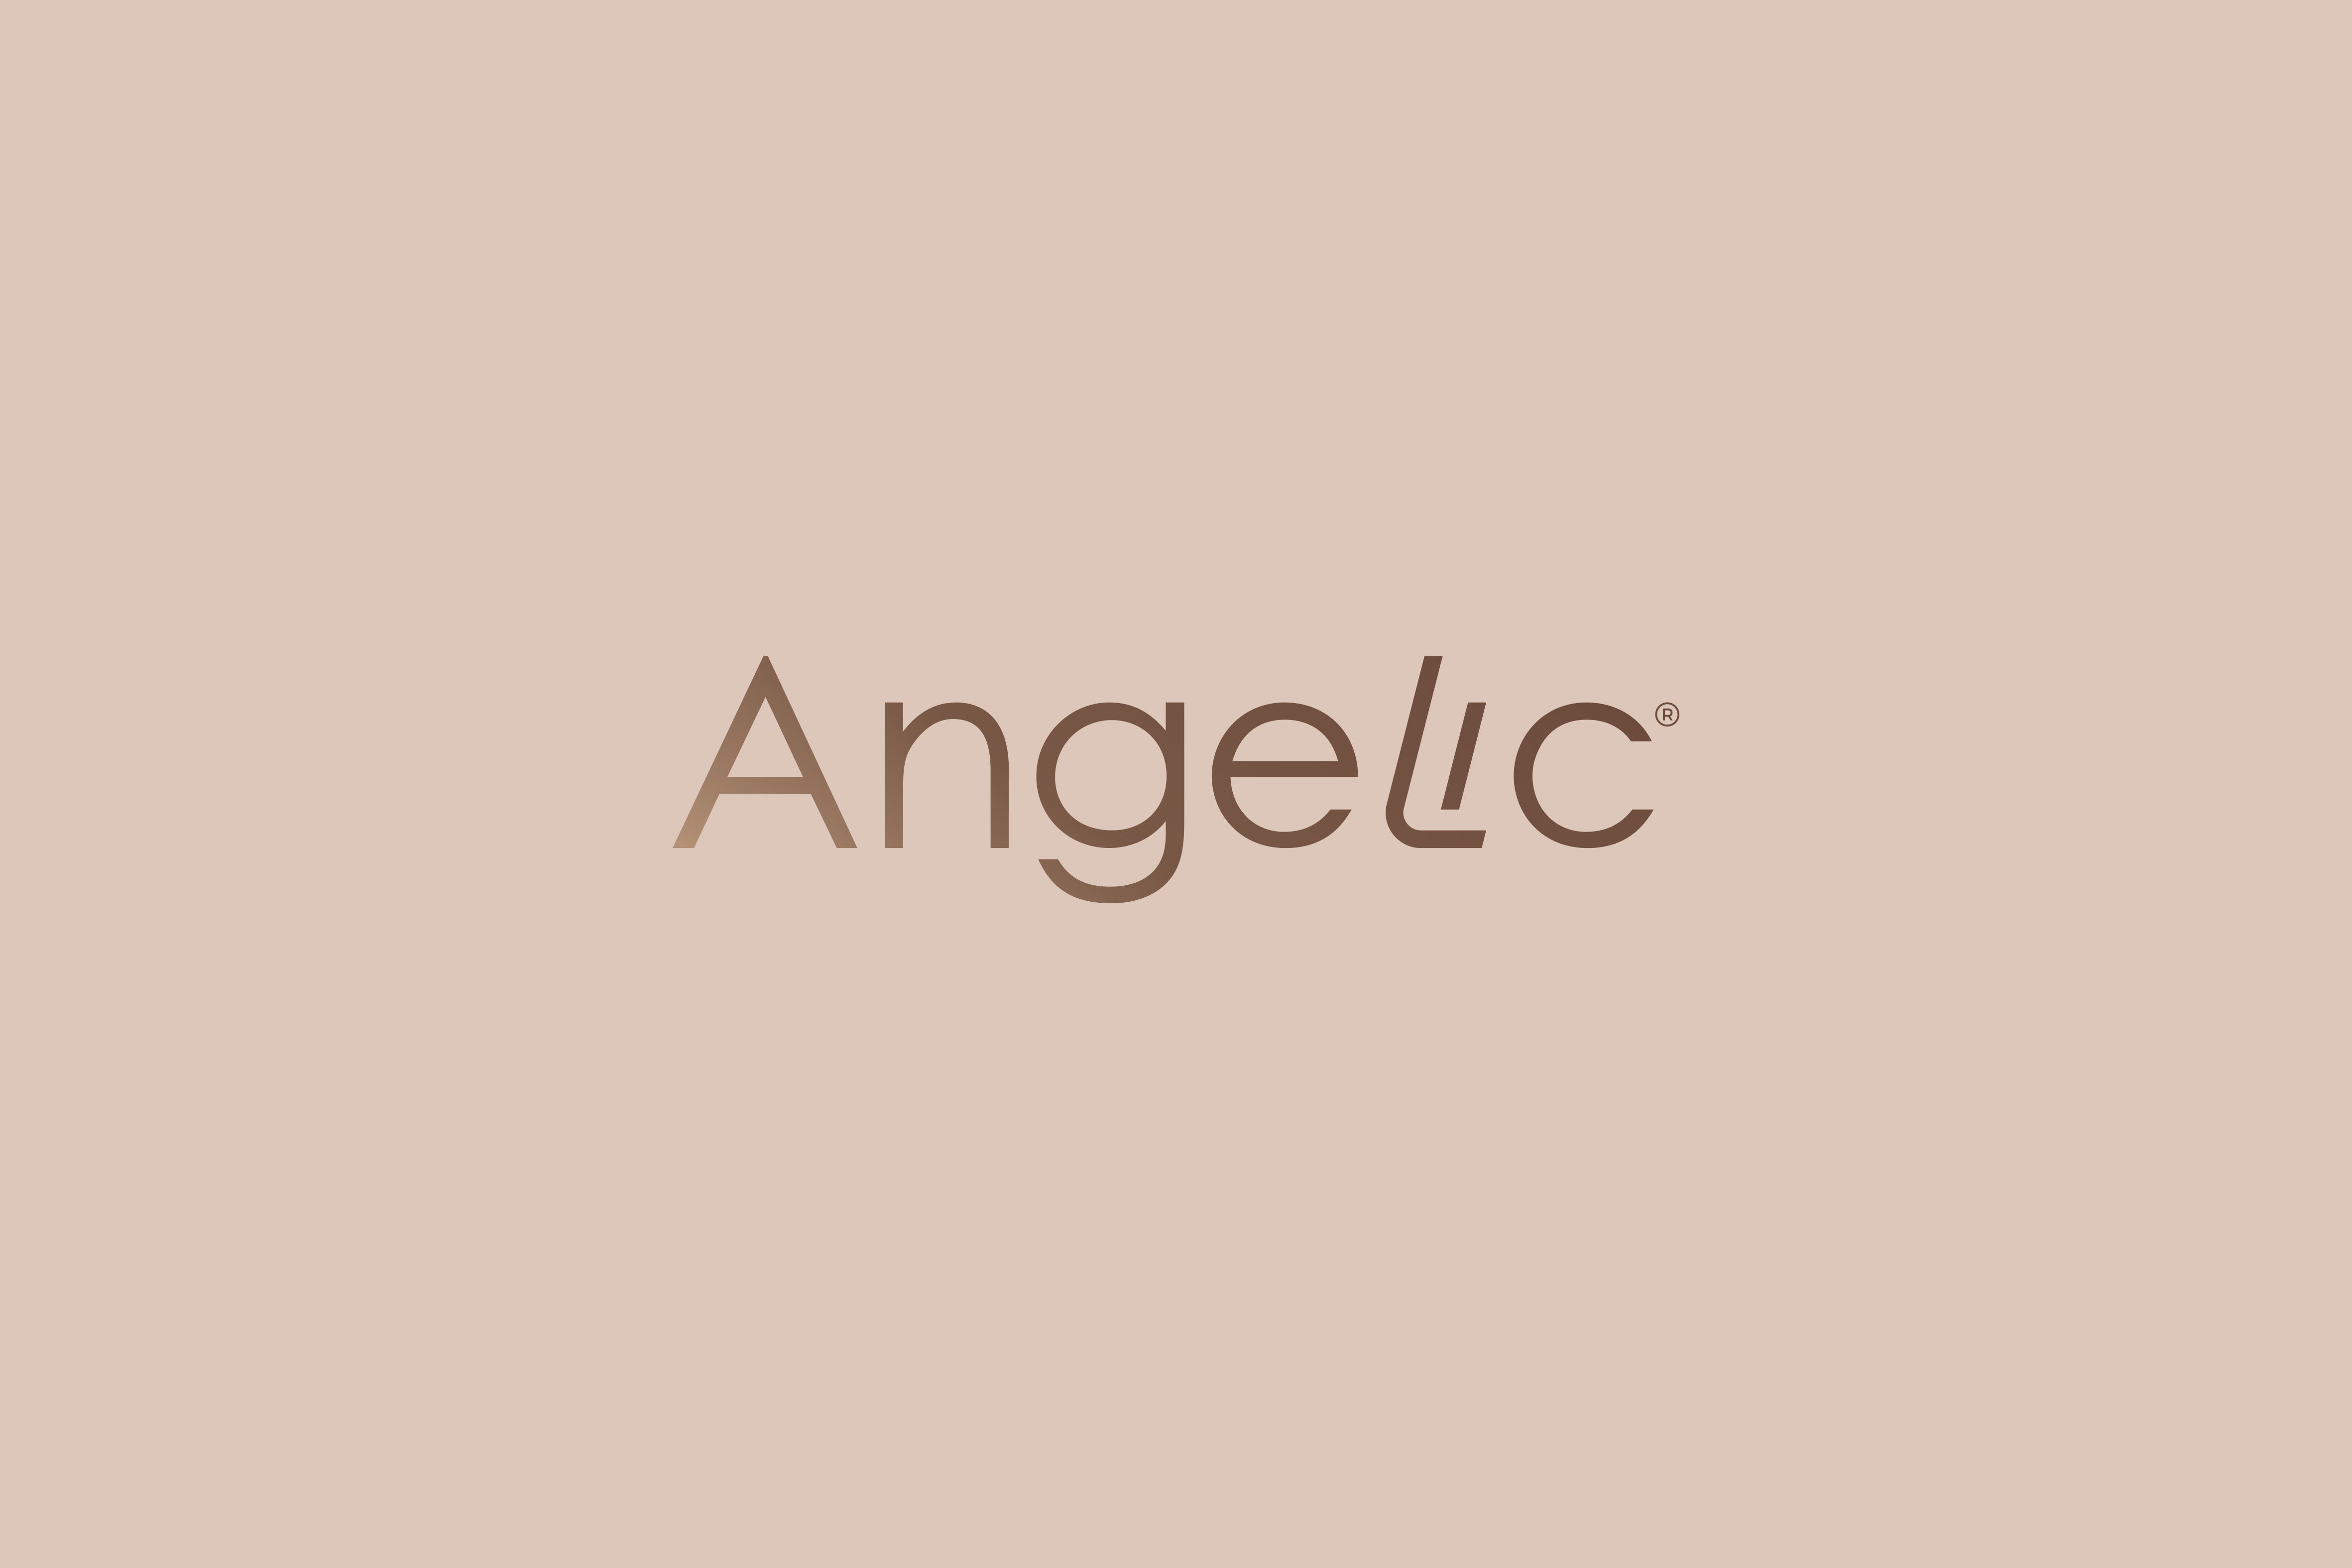 Angelic High-End Women’s Fashion Brand Designed by InSpace Creative